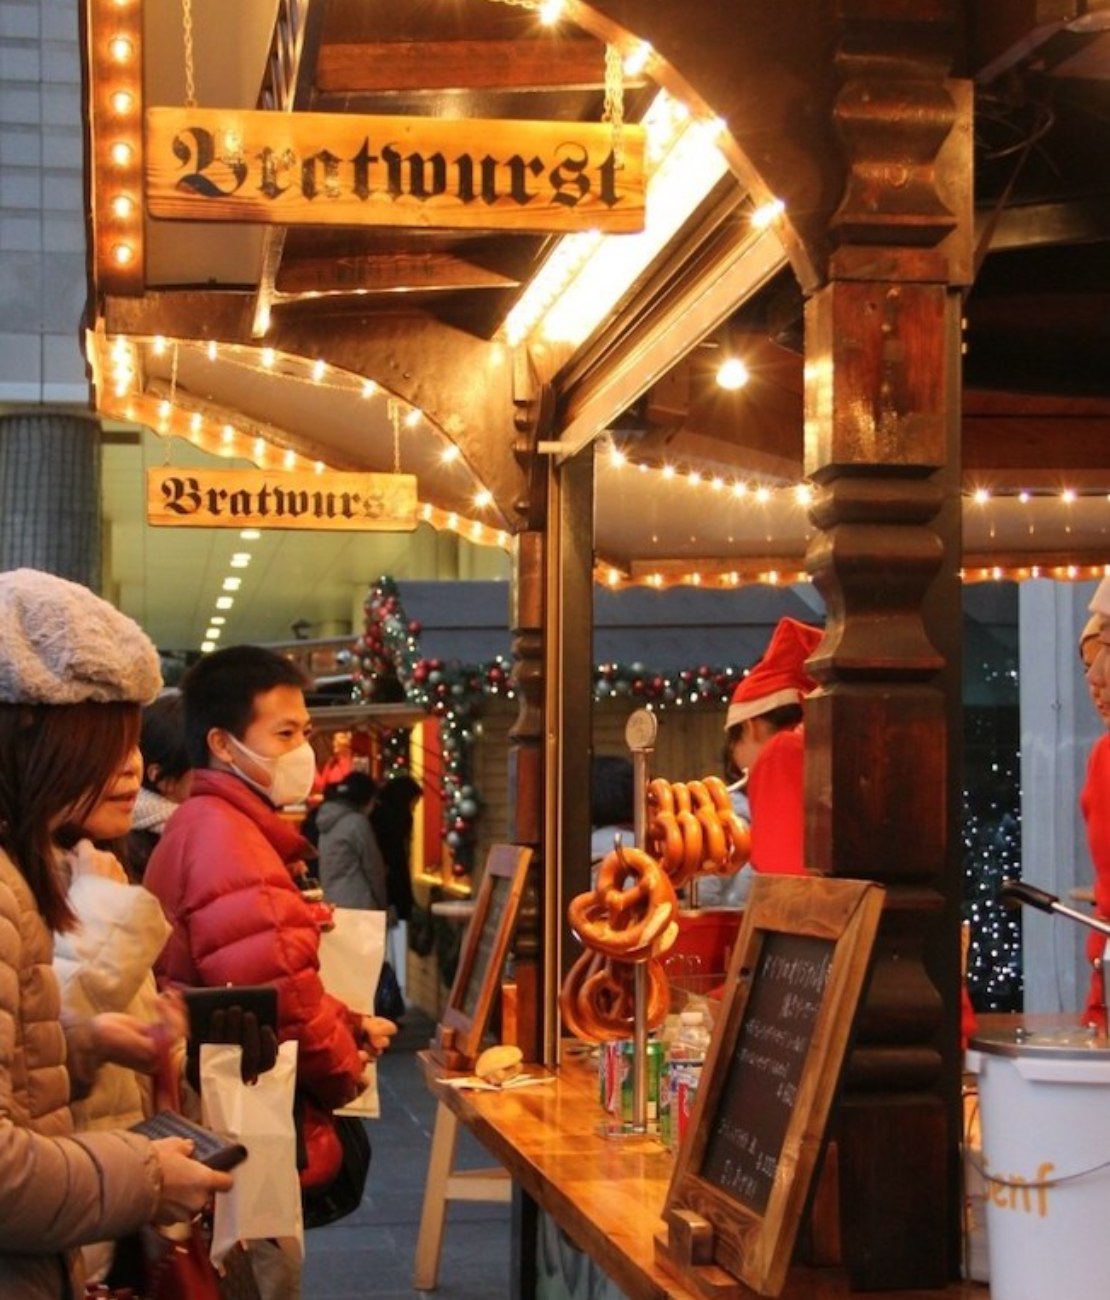 Festive goers queuing for pretzels at the German Christmas Market in Osaka, Japan